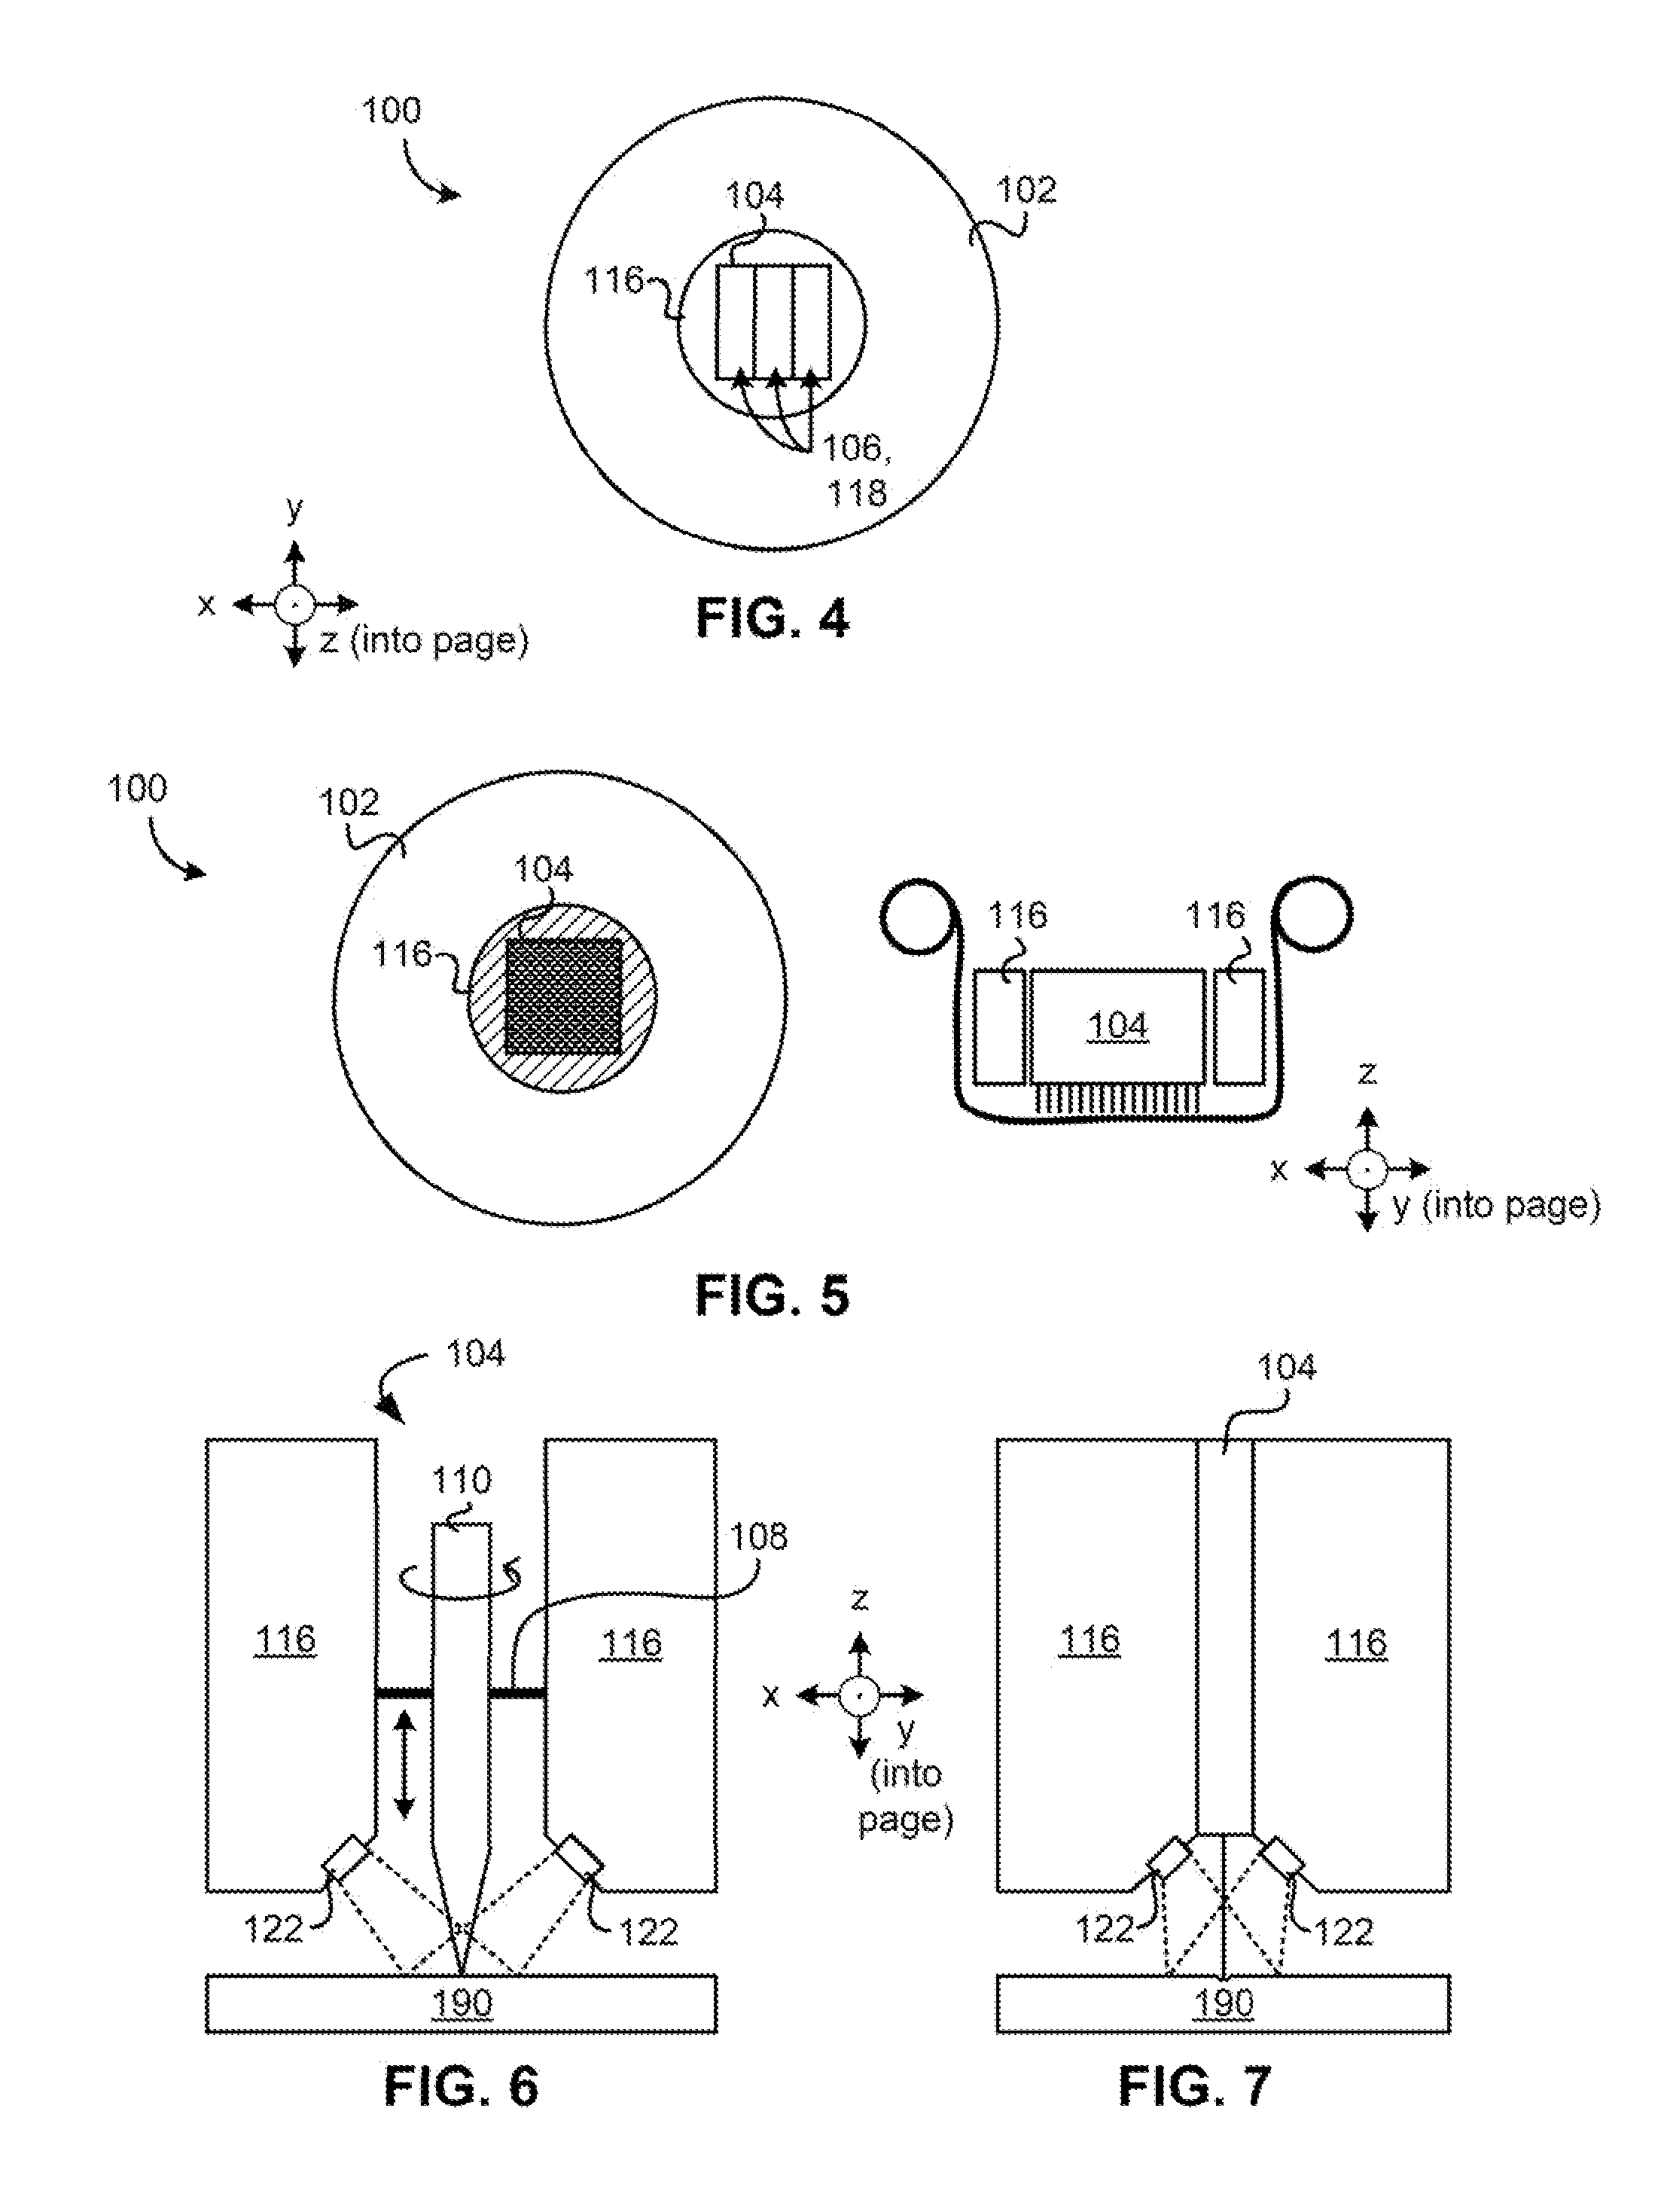 Arbitrary Surface Printing Device for Untethered Multi-Pass Printing